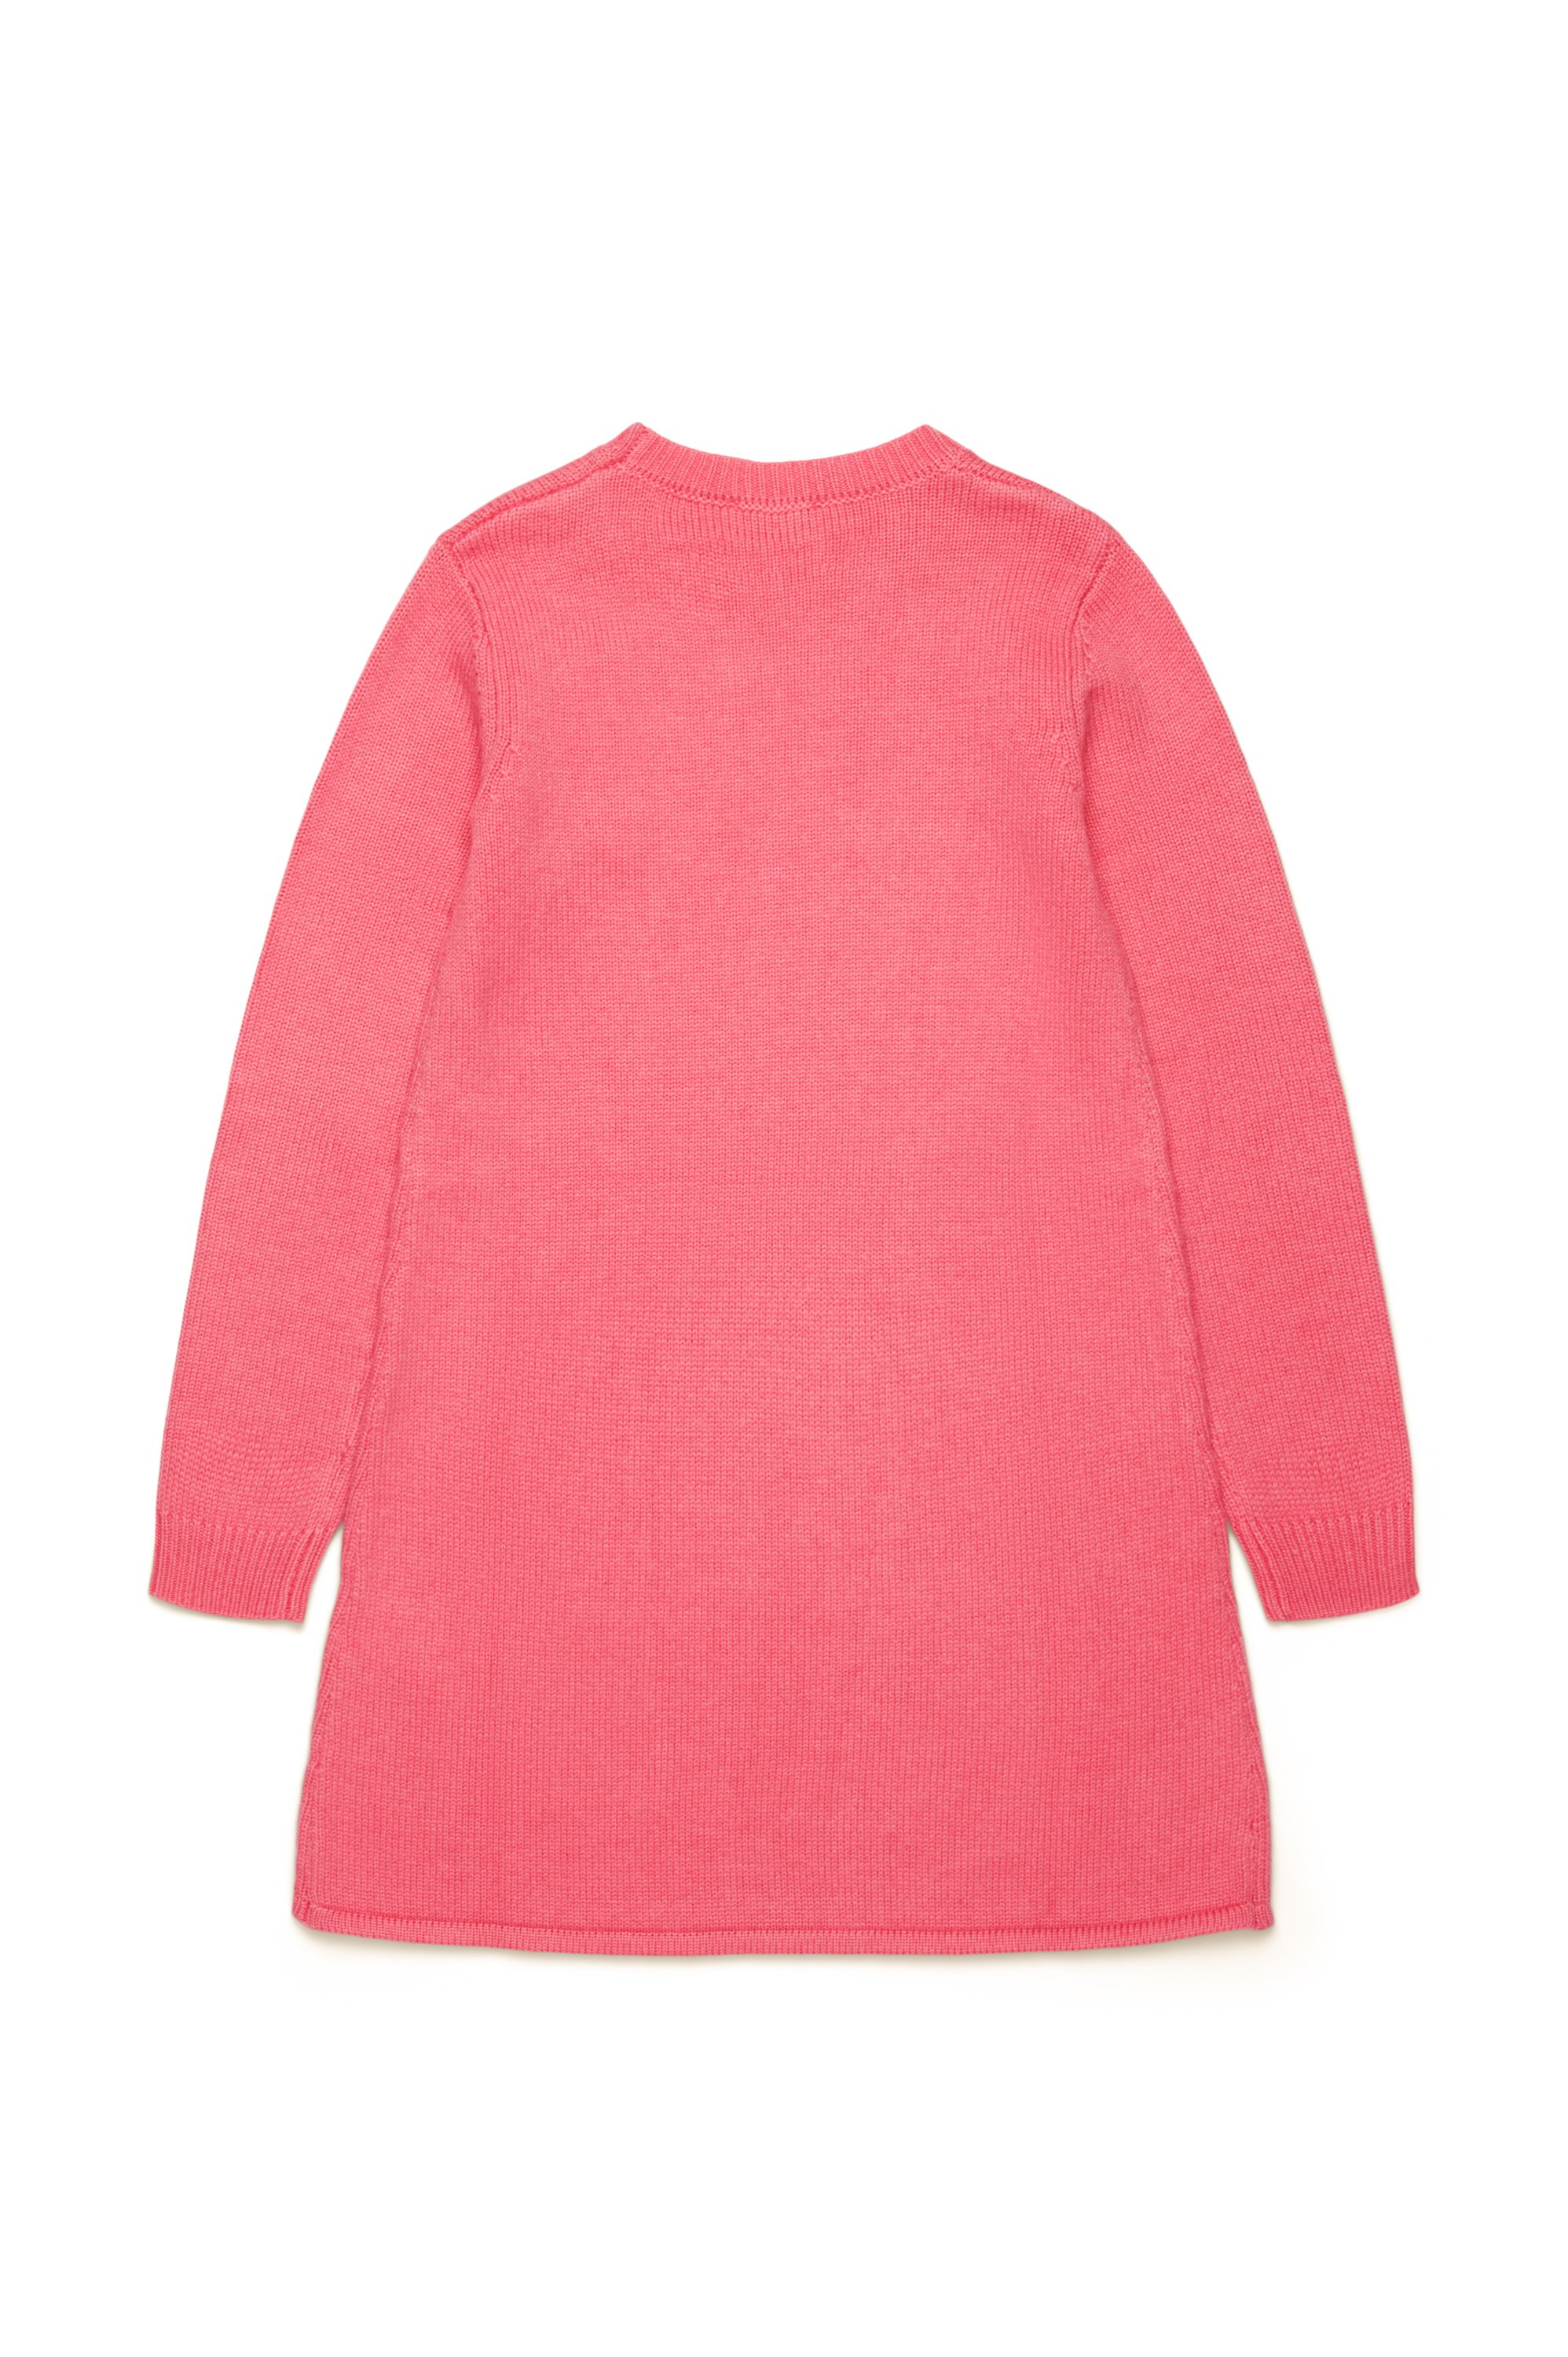 Diesel - DGANDIE, Woman Dress in cashmere-enriched knit in Pink - Image 2